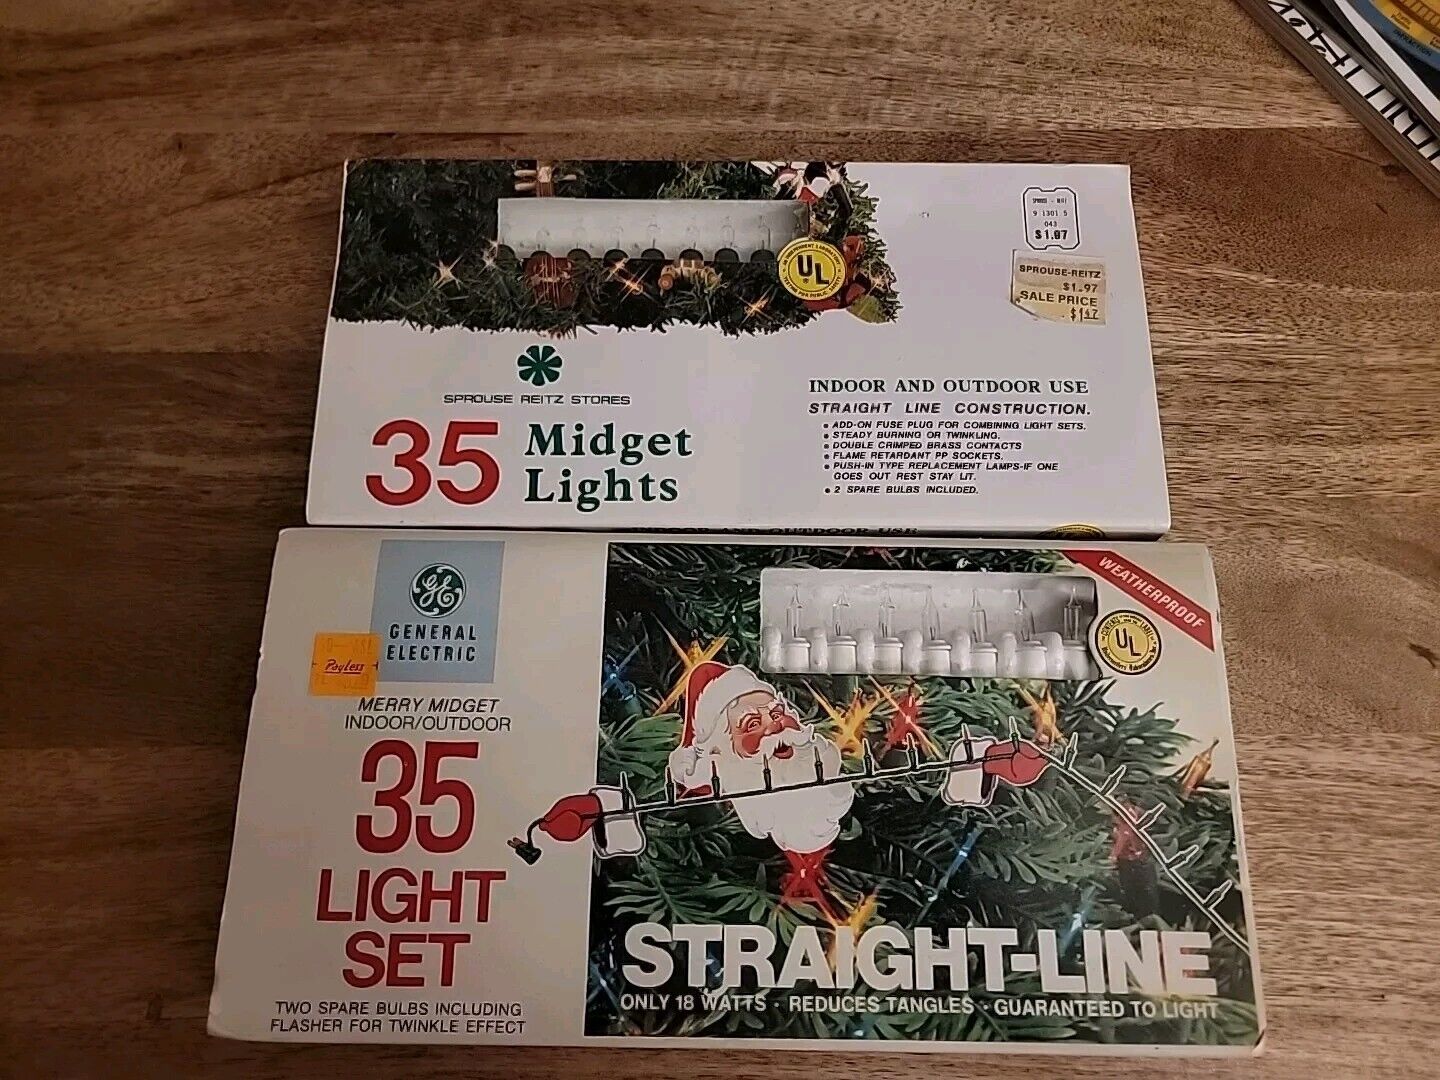 2 NEW Vintage General Electric Merry Midget Assorted Color Bulbs 35 Light Set